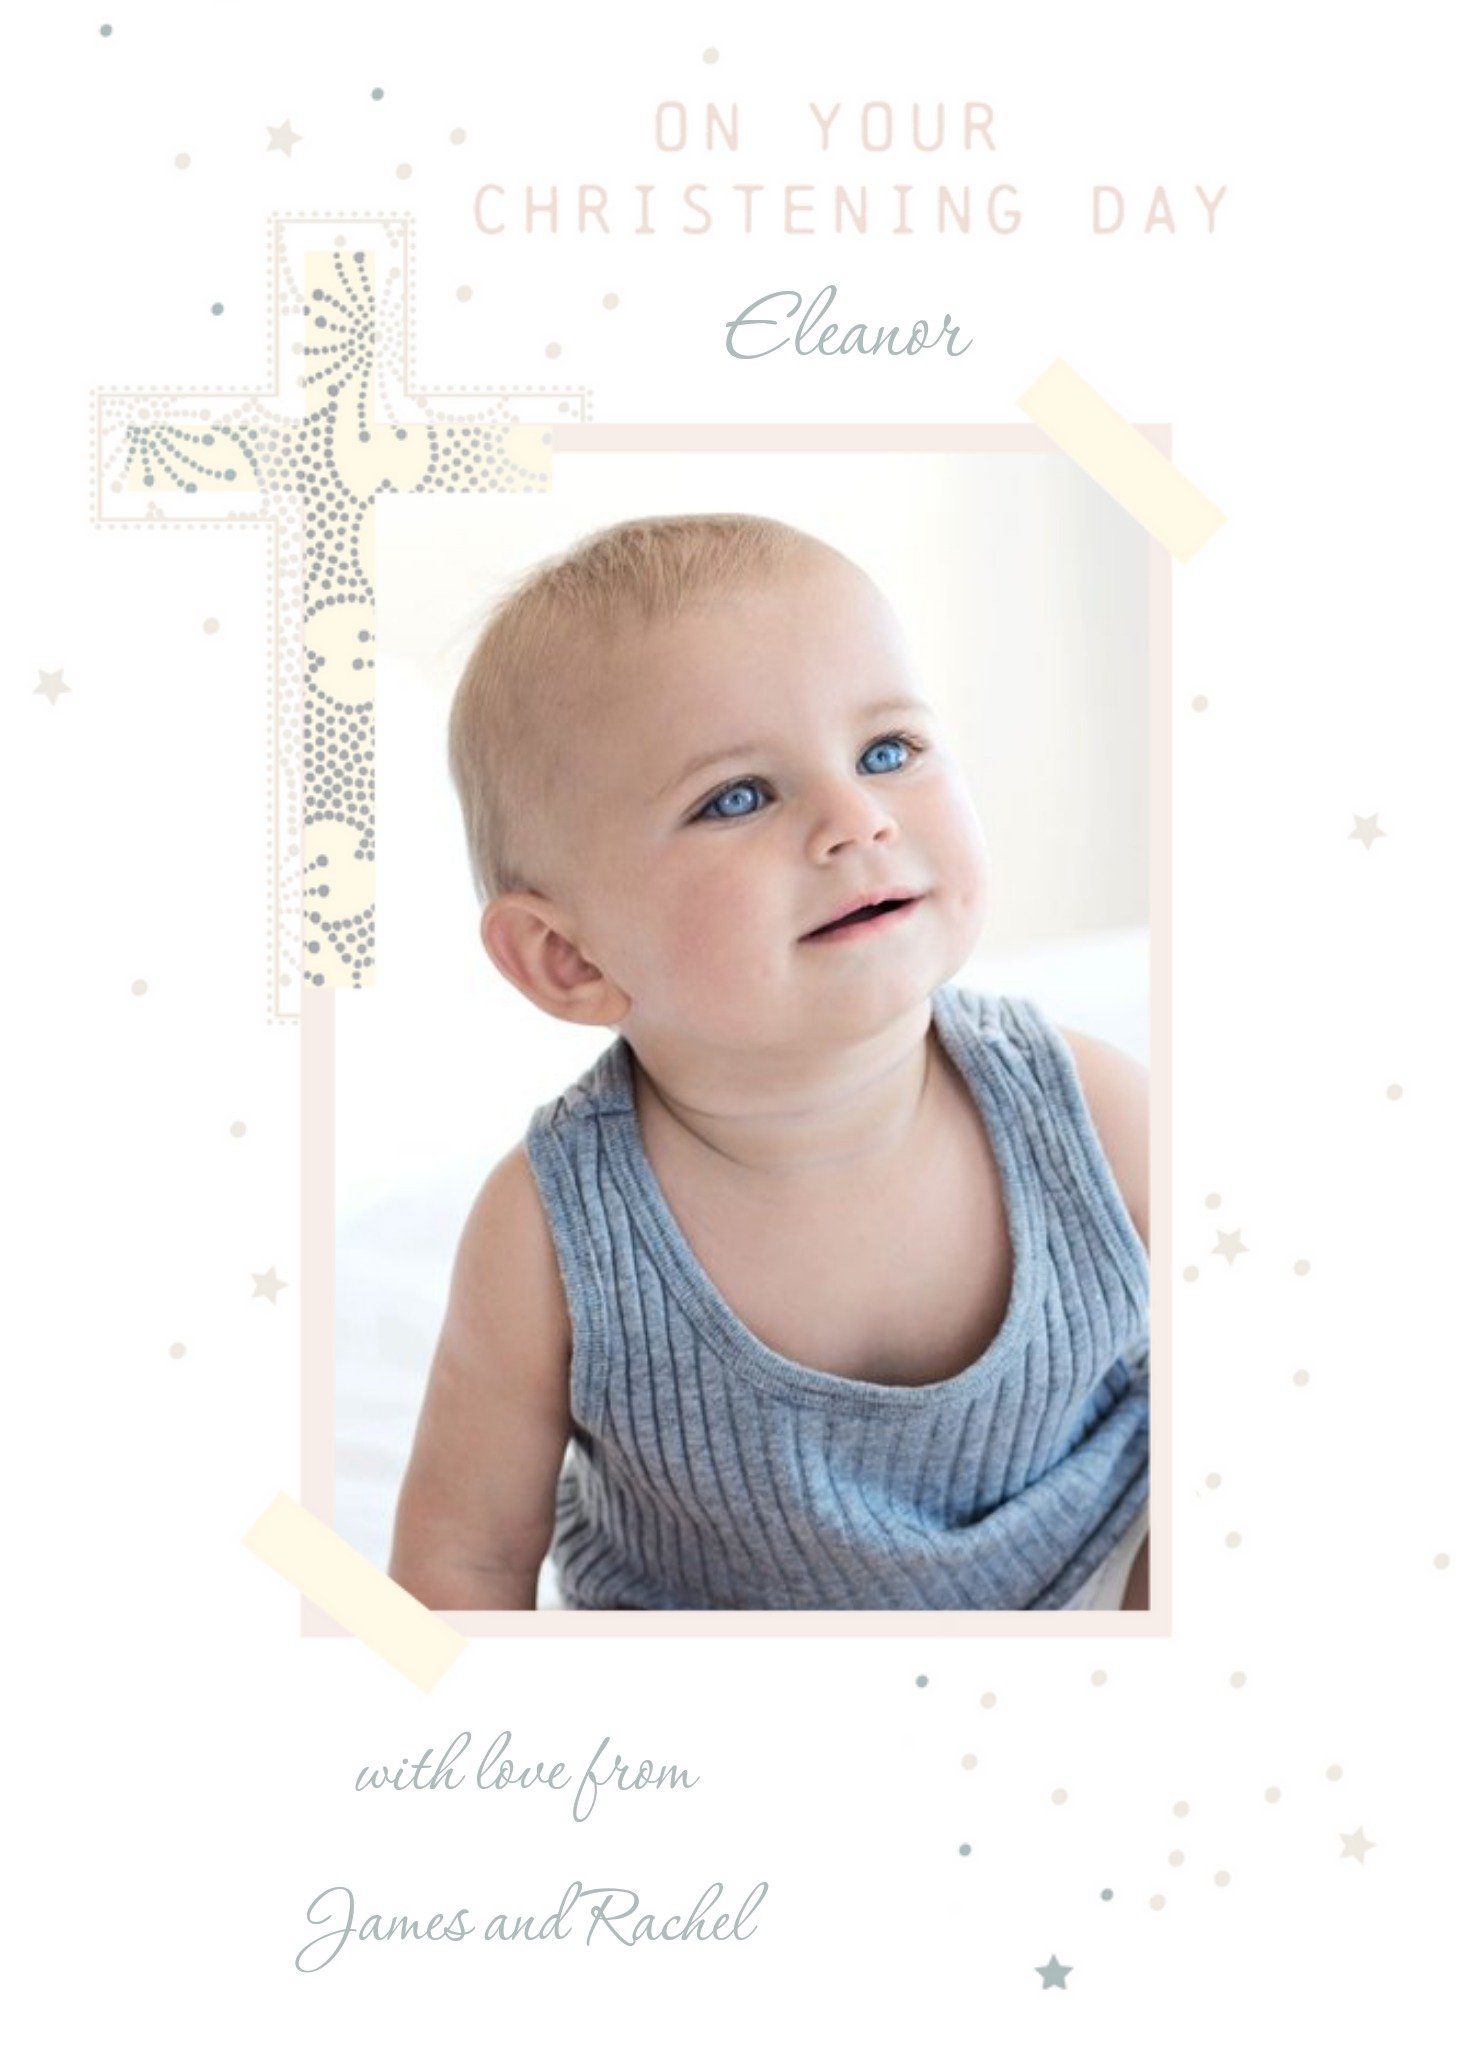 Ling Design Christian Cross With A Floral Pattern Christening Day Photo Upload Card , Large